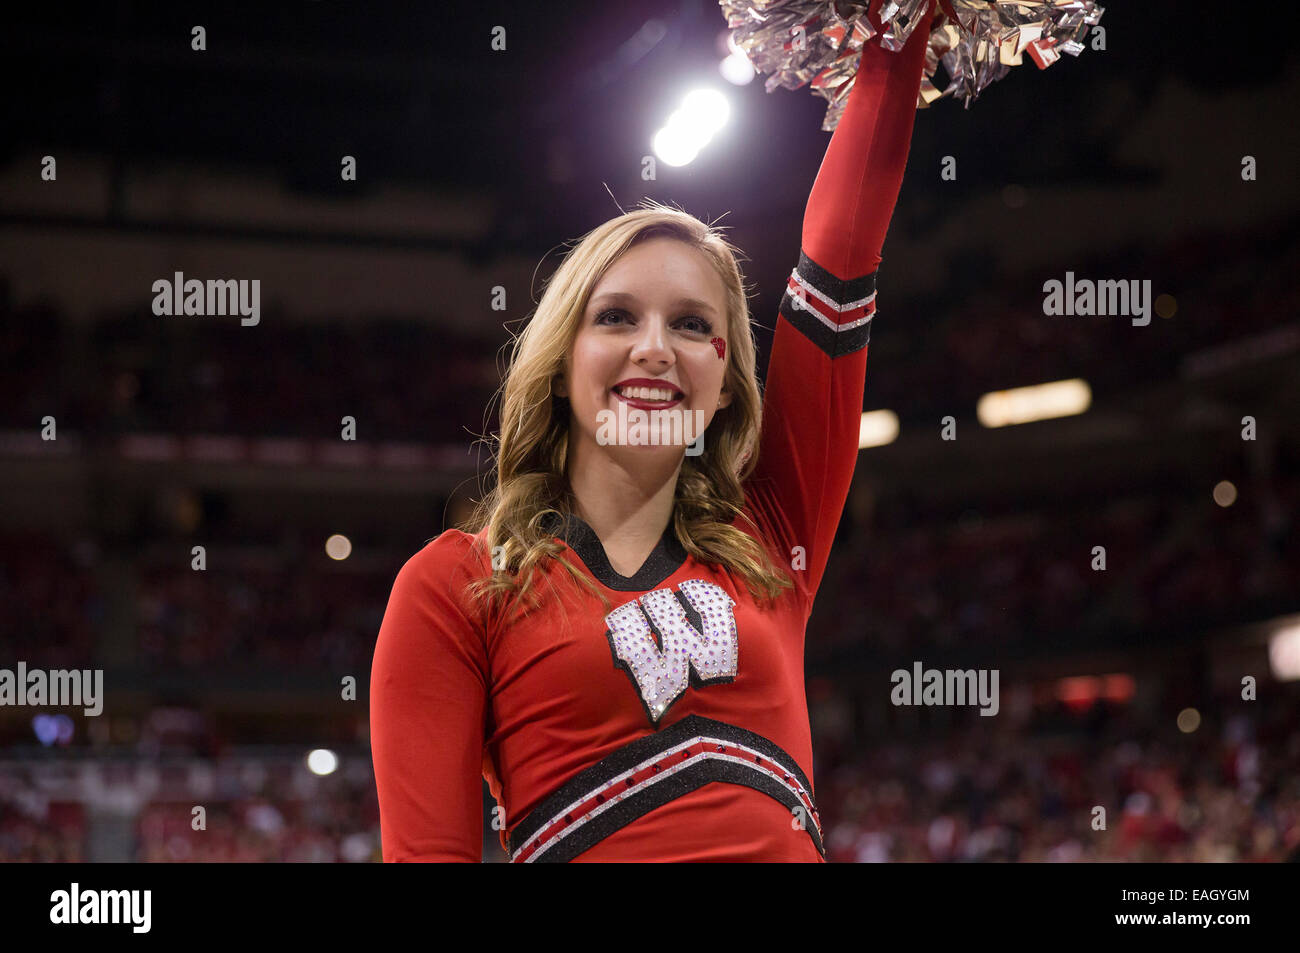 November 14, 2014: Wisconsin cheerleader during the NCAA Basketball game between the Wisconsin Badgers and the Northern Kentucky Norse at the Kohl Center in Madison, WI. Wisconsin defeated Northern Kentucky 62-31. John Fisher/CSM Stock Photo